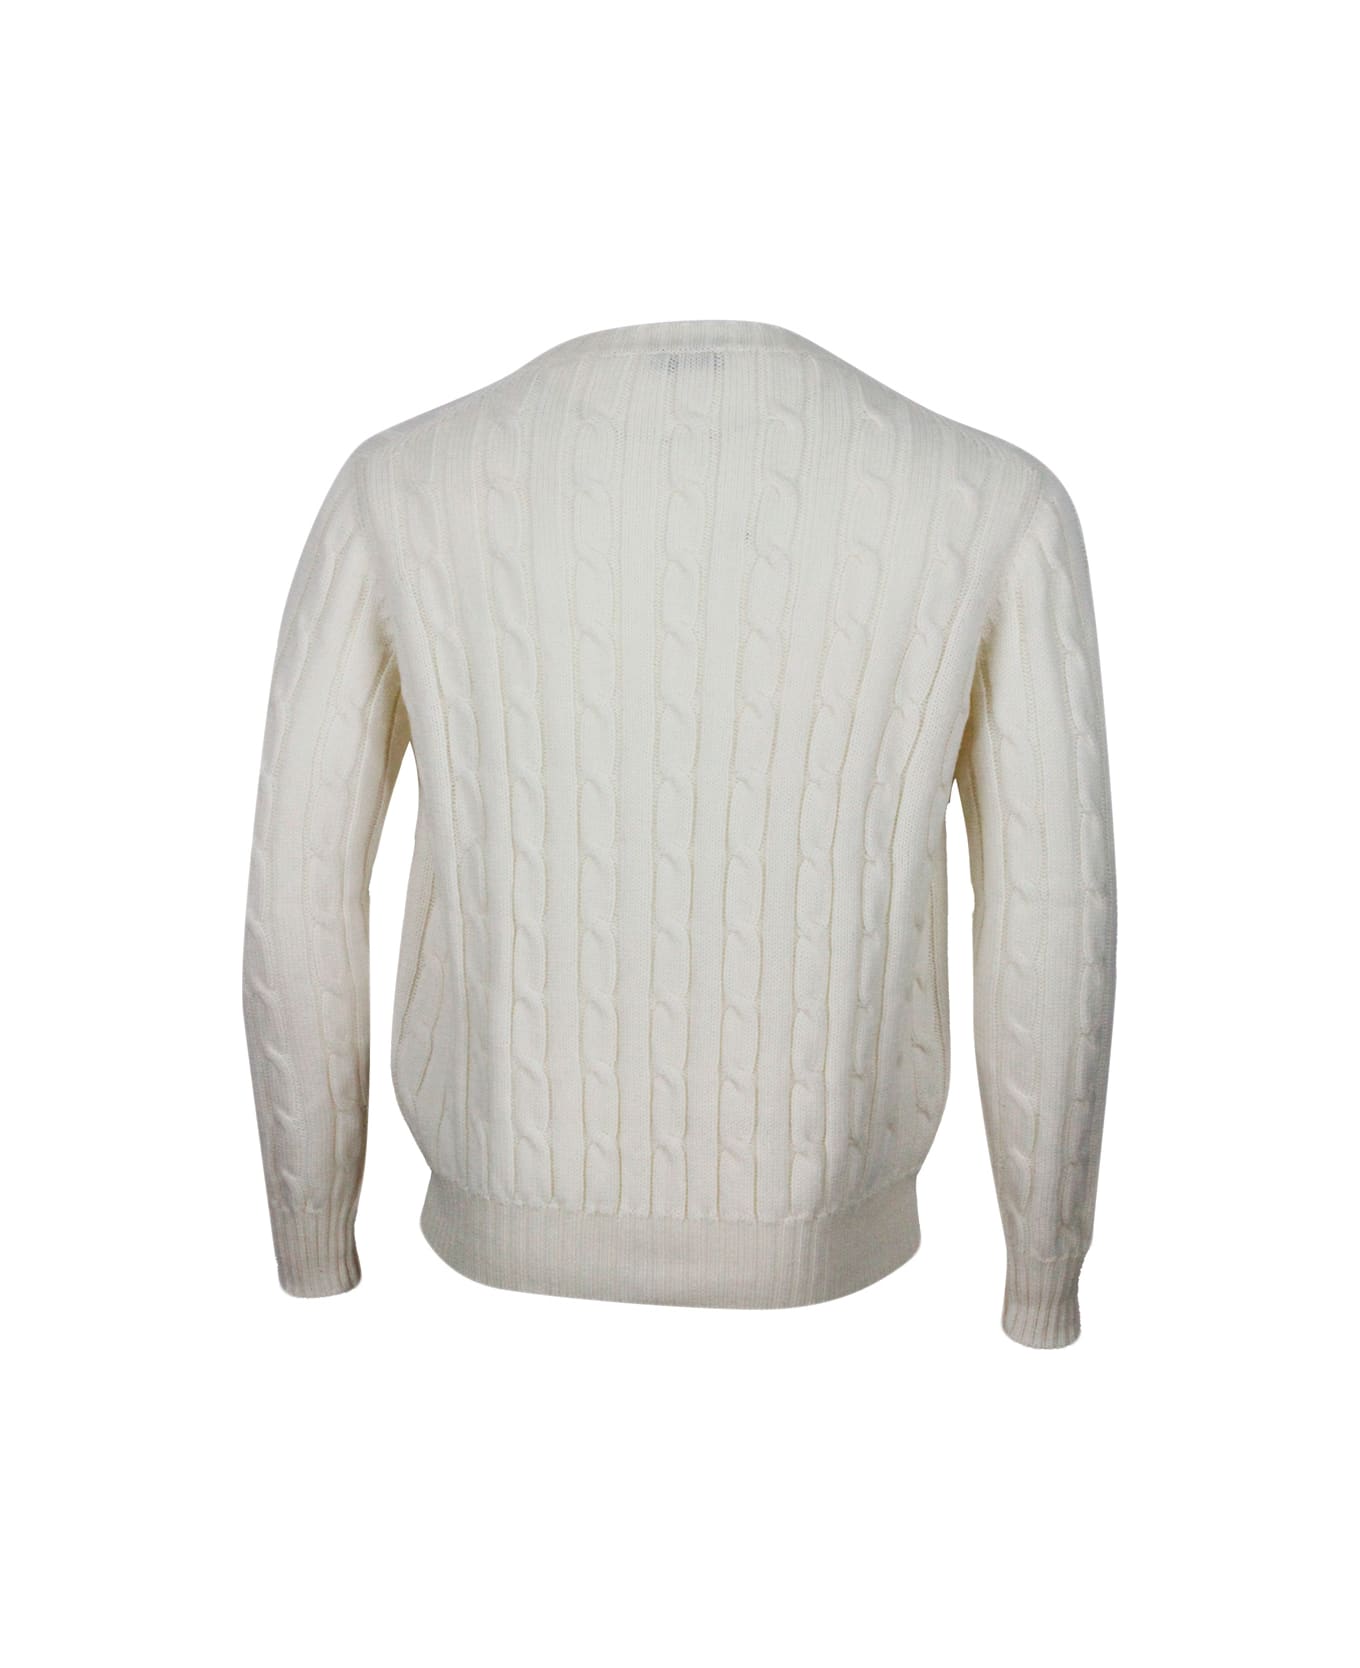 Sonrisa Crewneck Sweater In Fine And Soft Merino Wool With Cable Knit - Cream